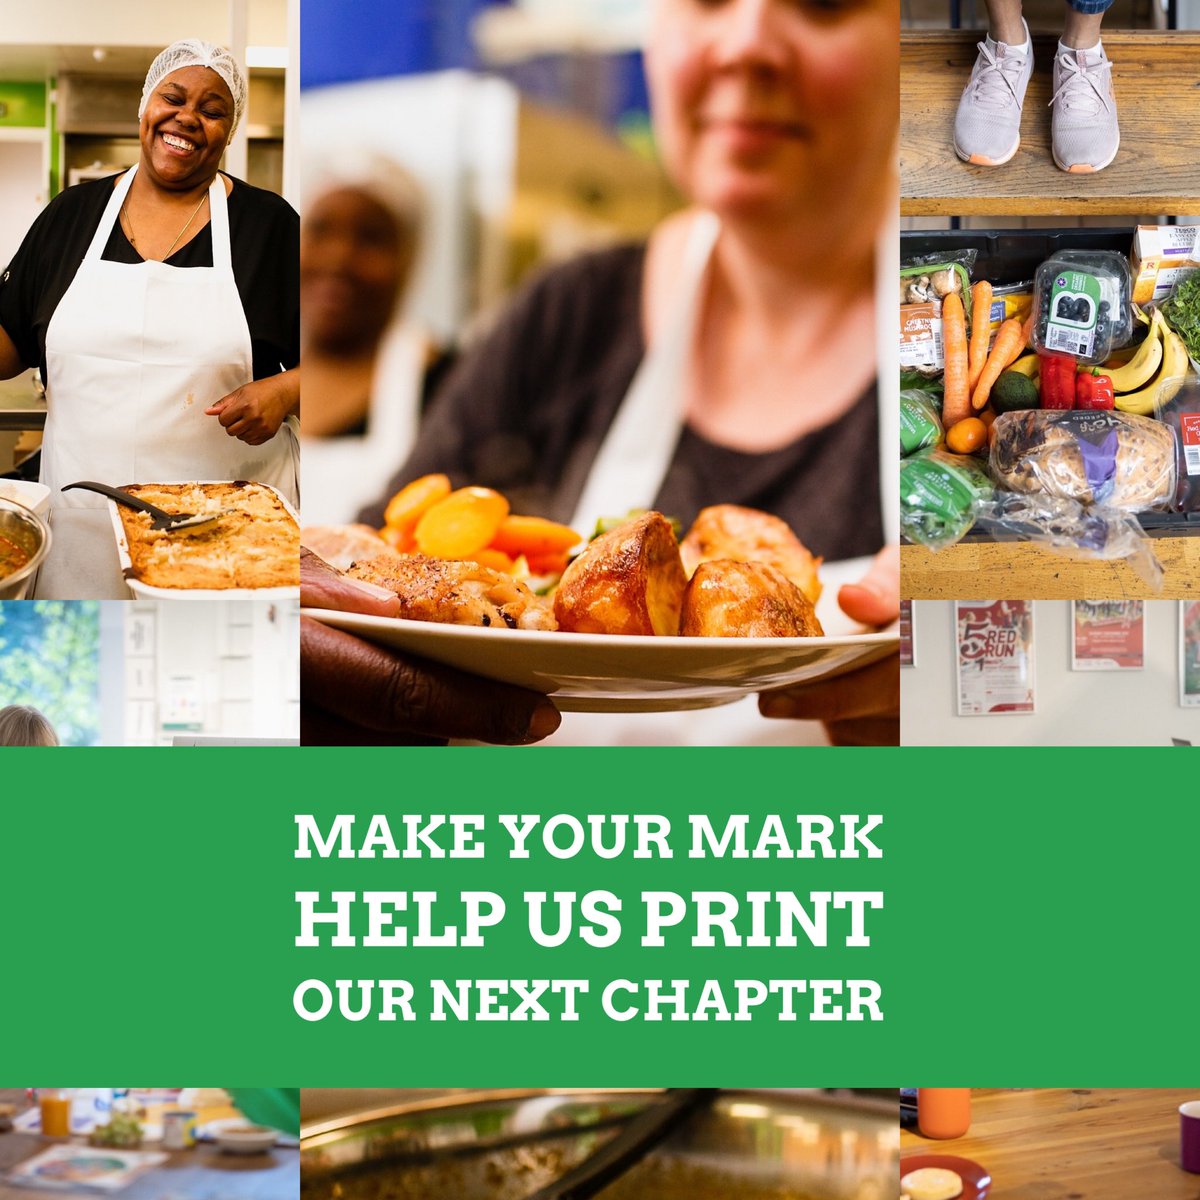 🙌 Help us make a big impact! Seeking sponsors to cover printing costs for crucial fundraising materials. DM to support The Food Chain's vital work. #SupportForACause #MakeADifference #CommunitySupport #CharityInitiative'